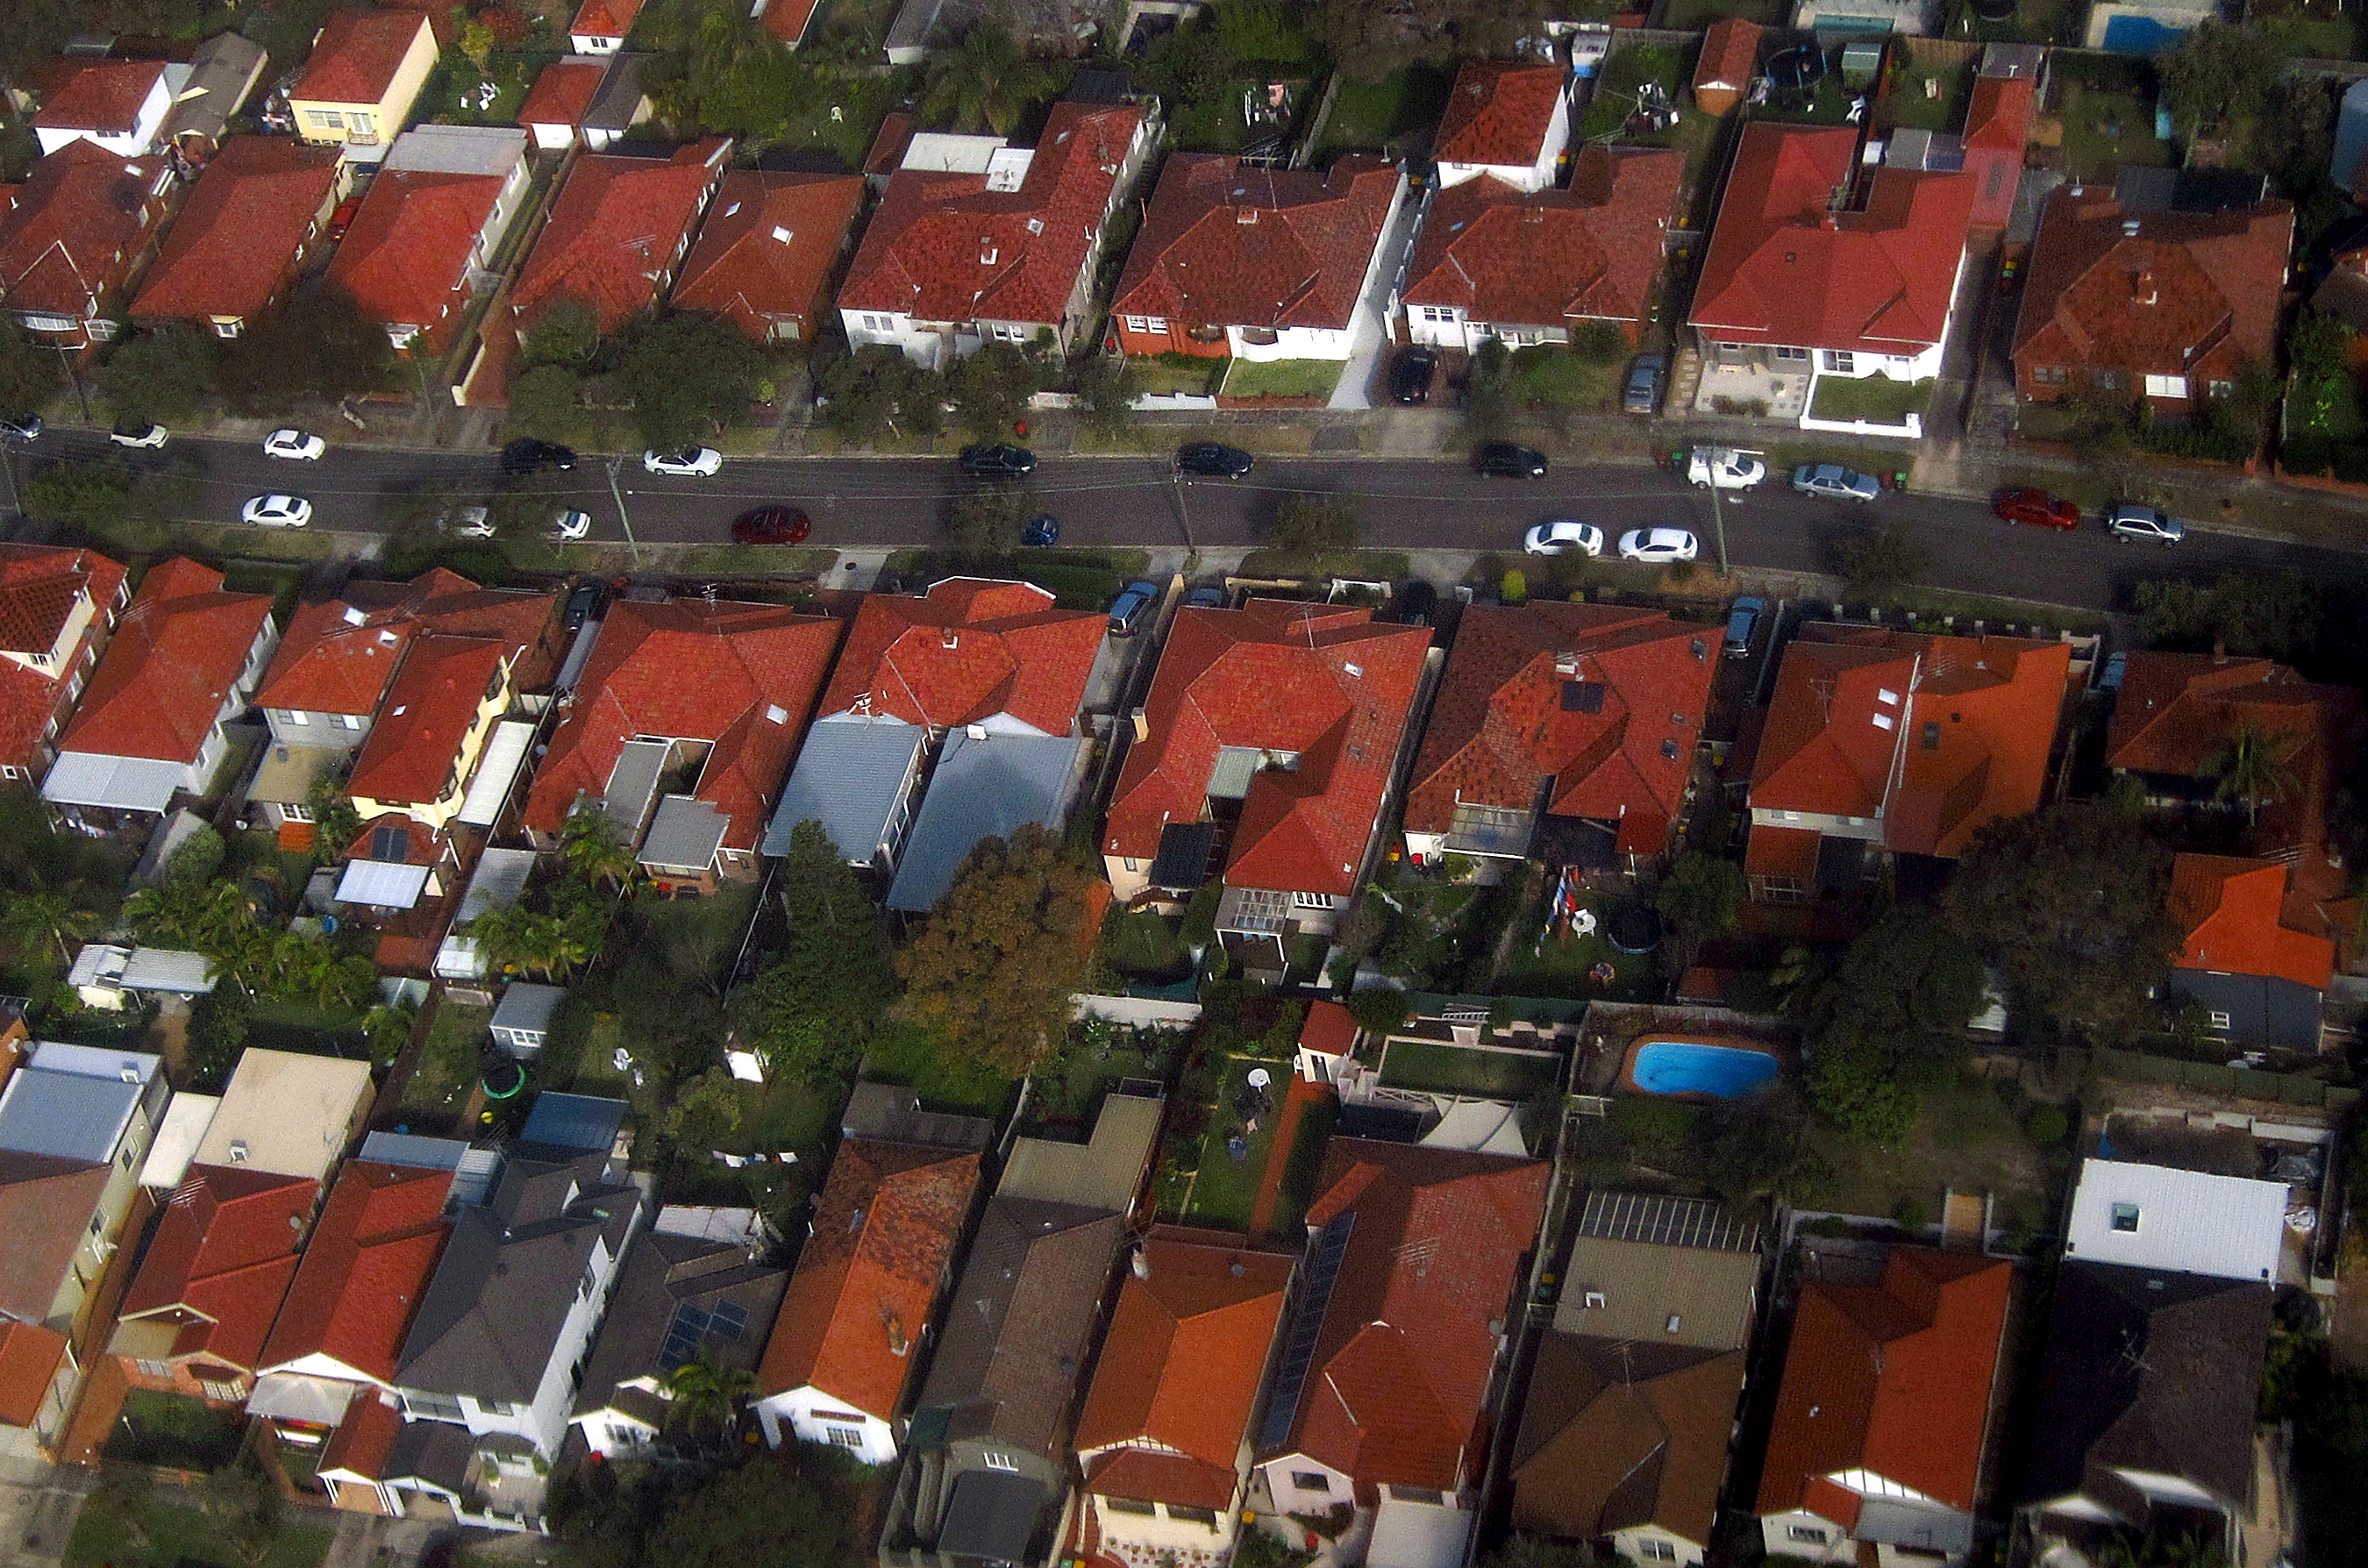 Properties can be seen in the Sydney suburb of Clovelly, Australia